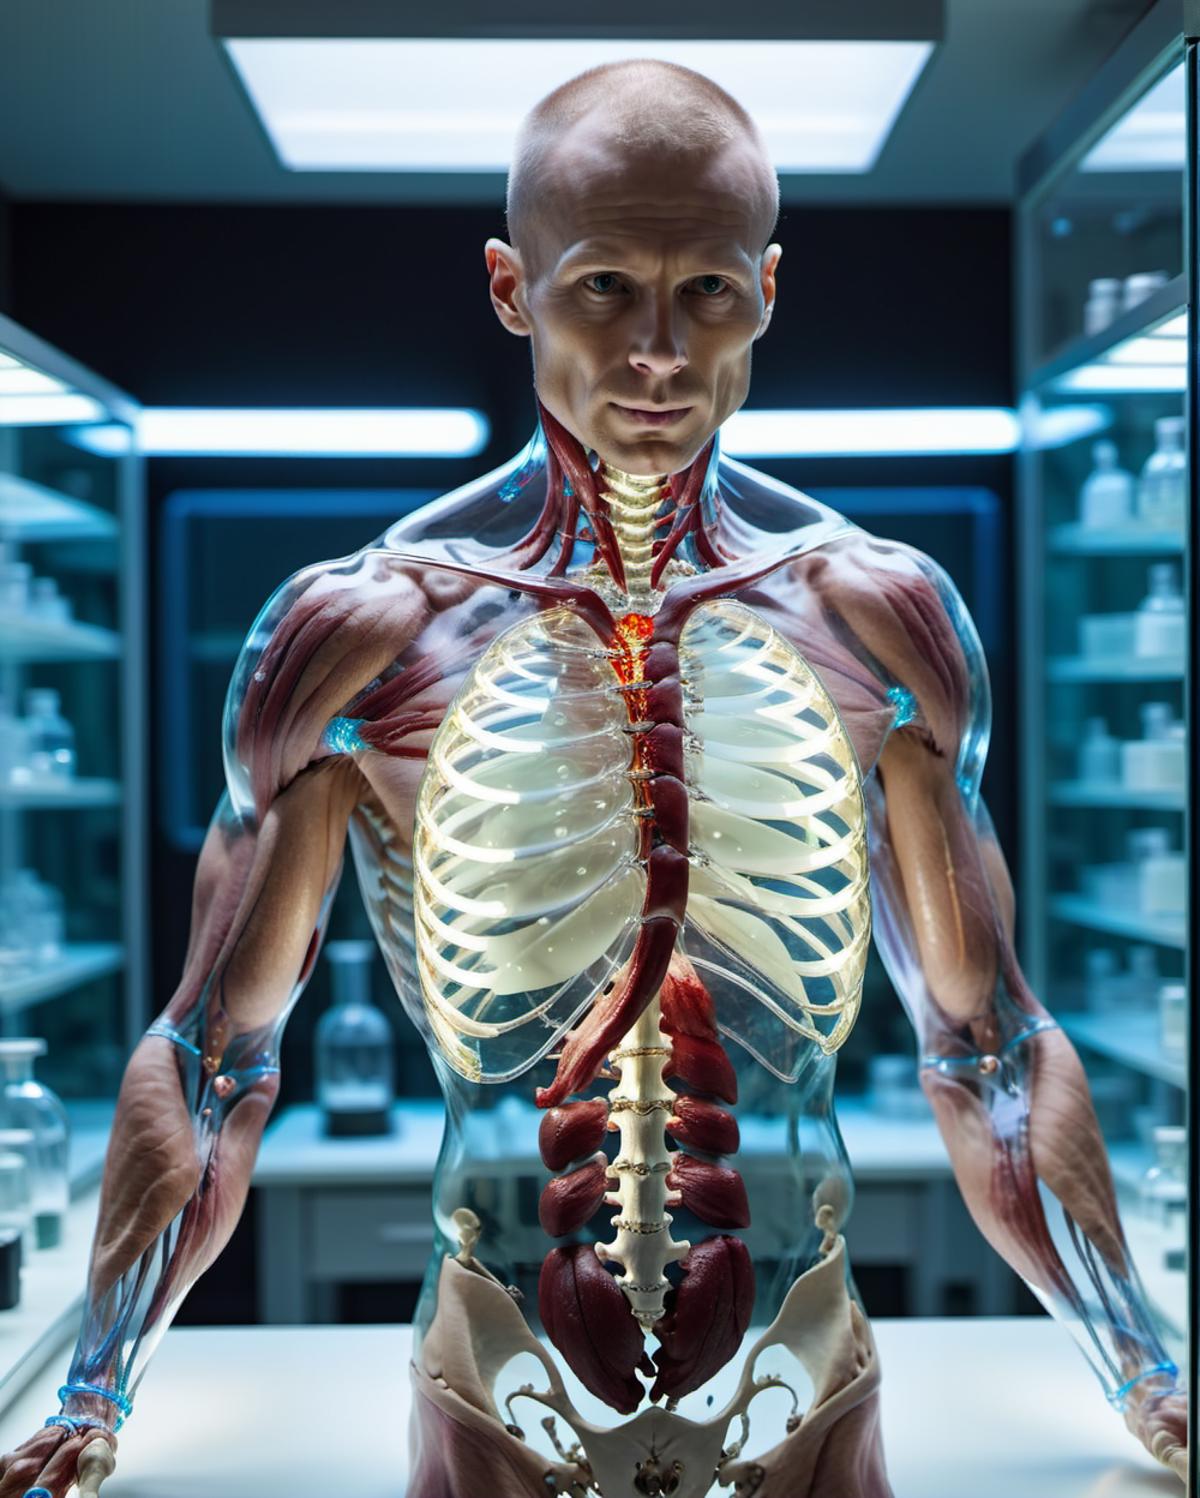 A life-like plastic model of a male torso with muscles and an exposed skeletal structure.